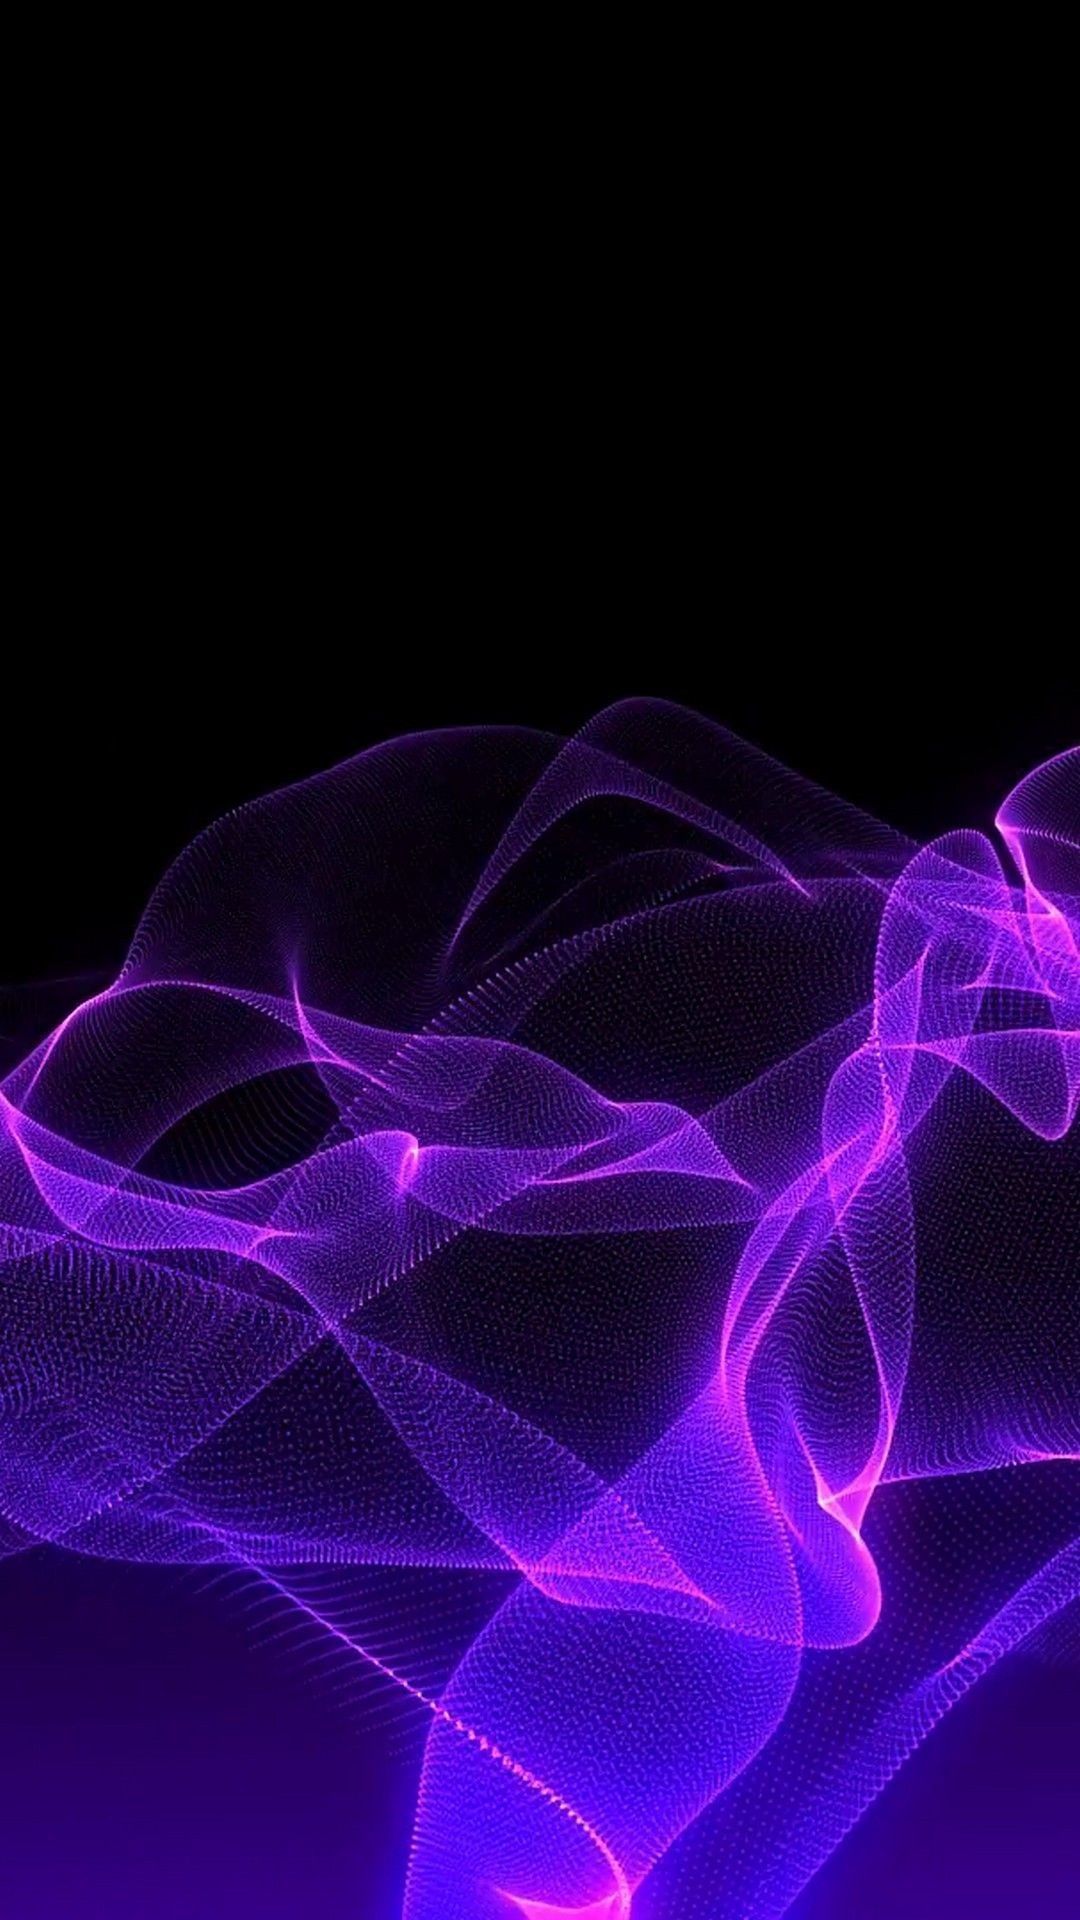 Cool Purple and Black Wallpaper Free Cool Purple and Black Background